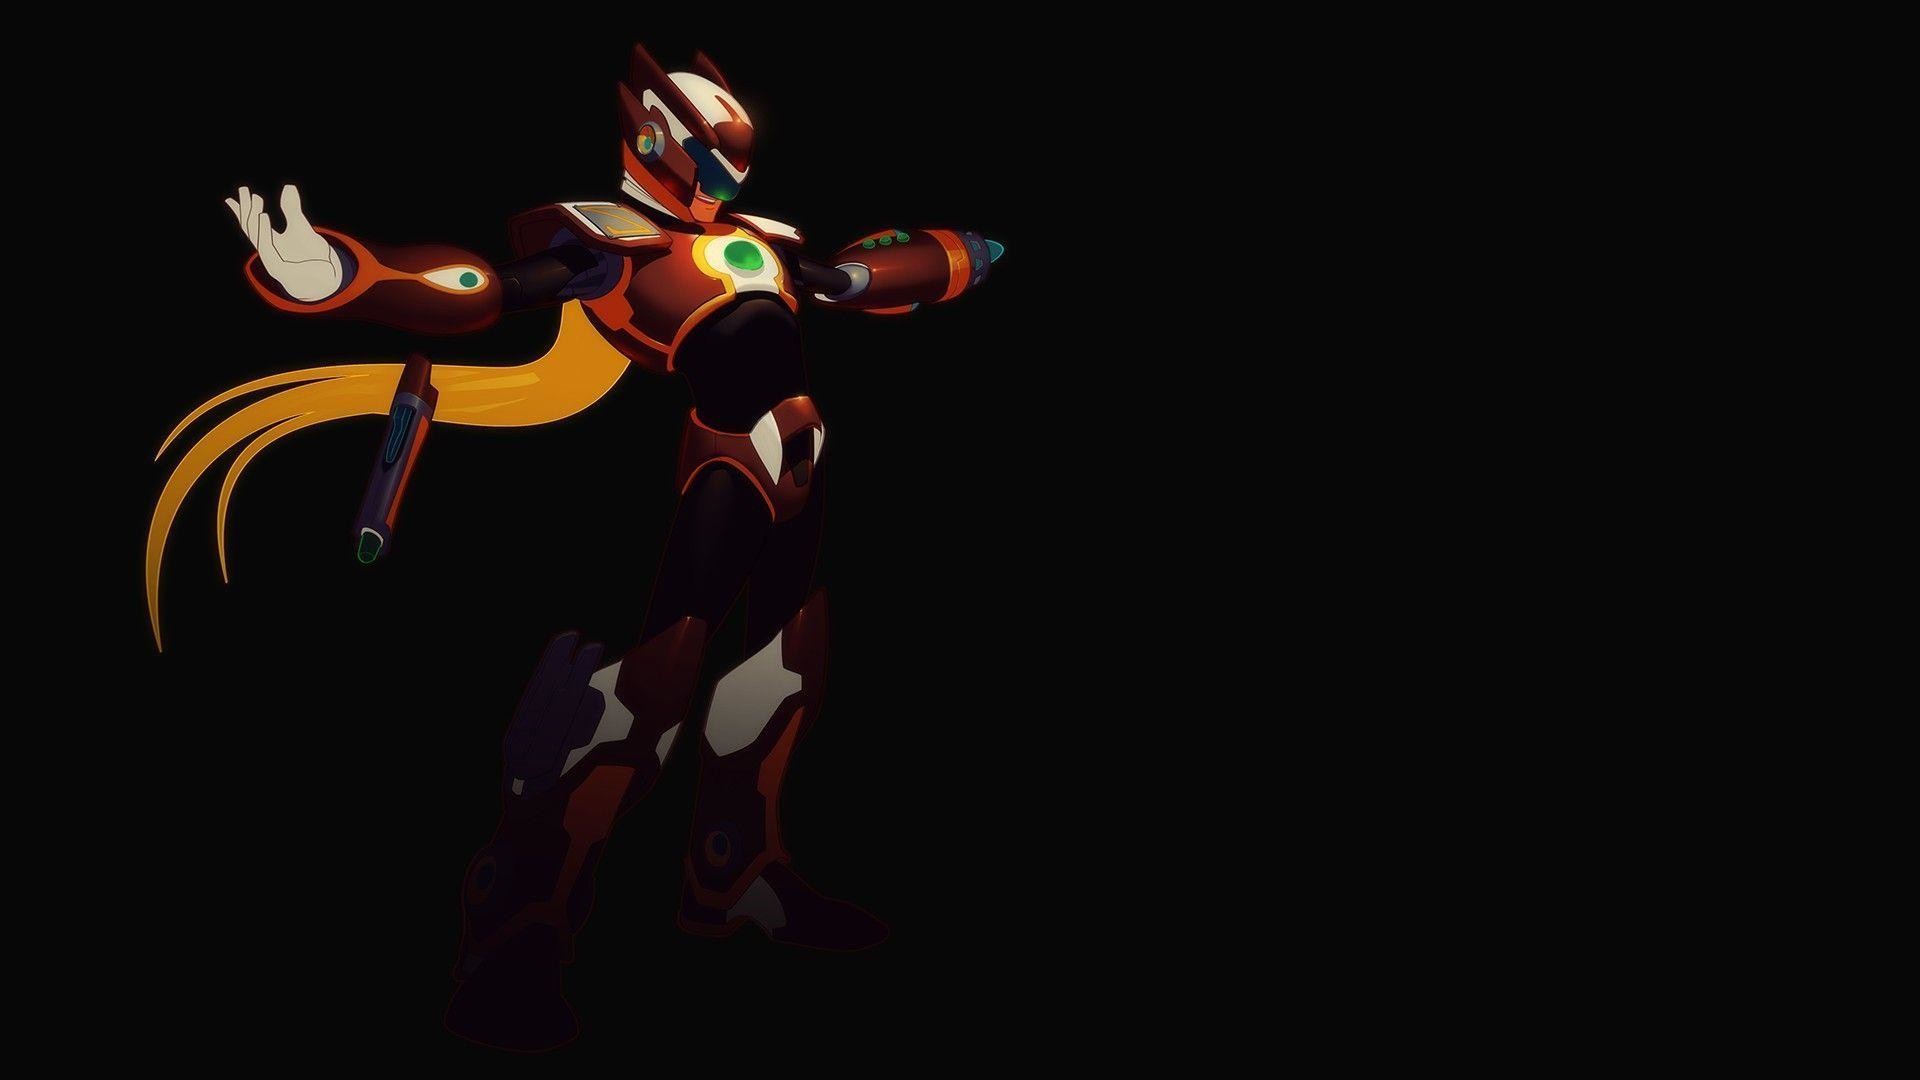 1920x1080 Game Megaman Zero wallpapers and images - wallpapers, pictures, photos